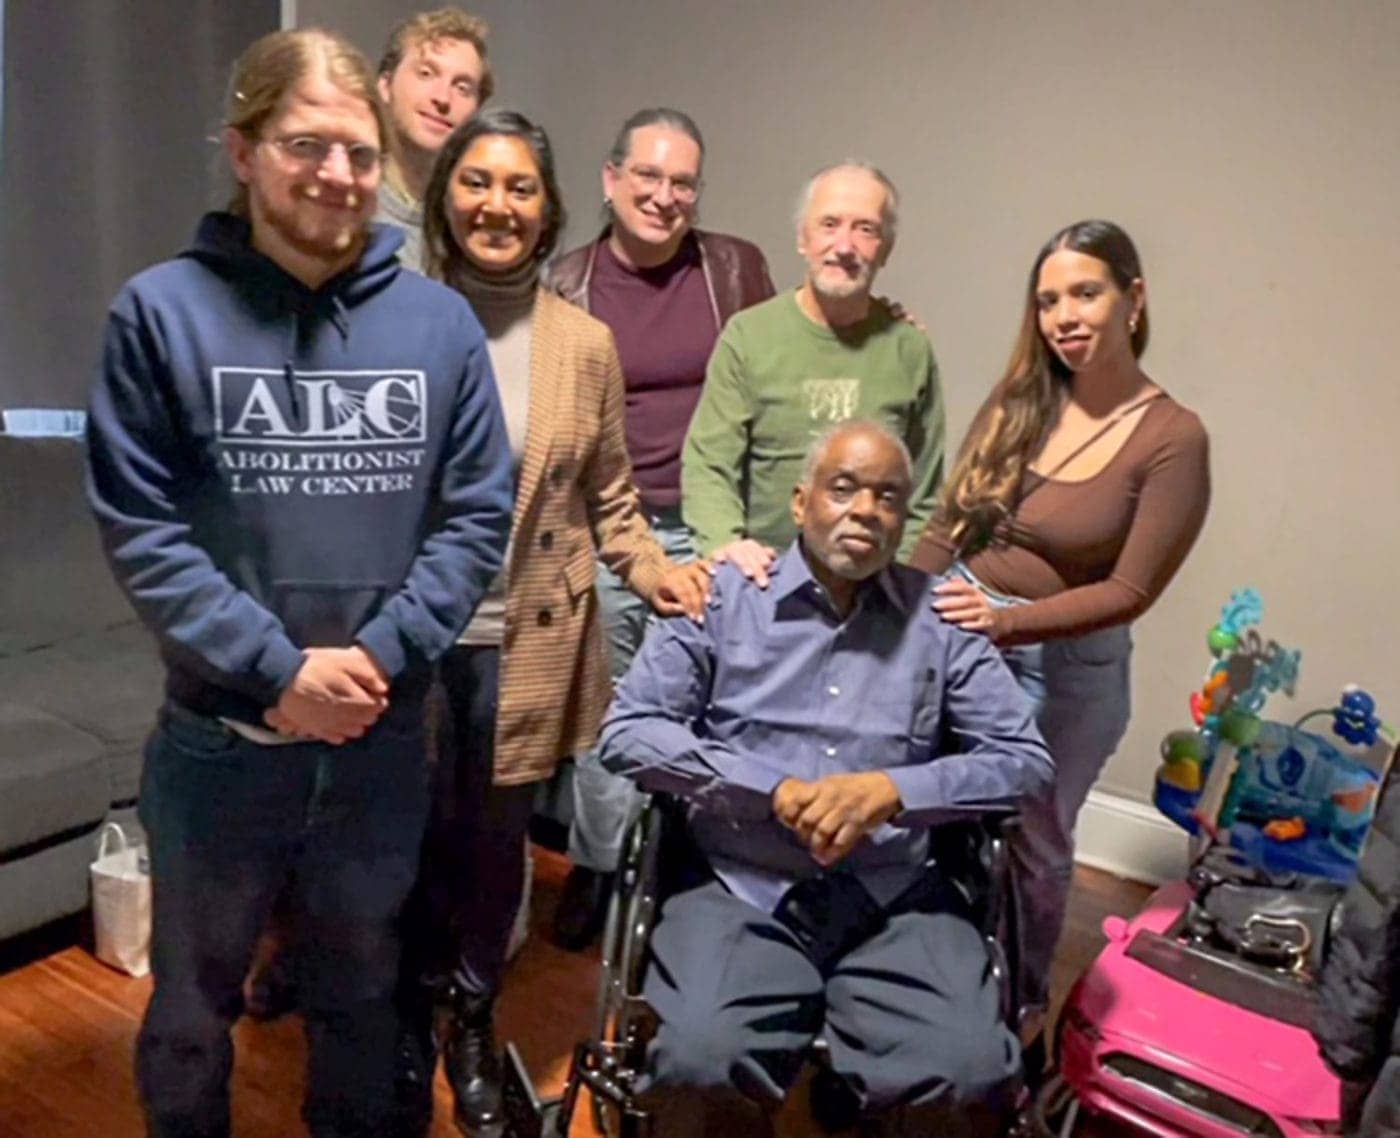 Bradford-Gamble-and-prison-abolition-activists-1400x1138, Released after 46 years, Bradford Gamble exposes medical abuse, Behind Enemy Lines 